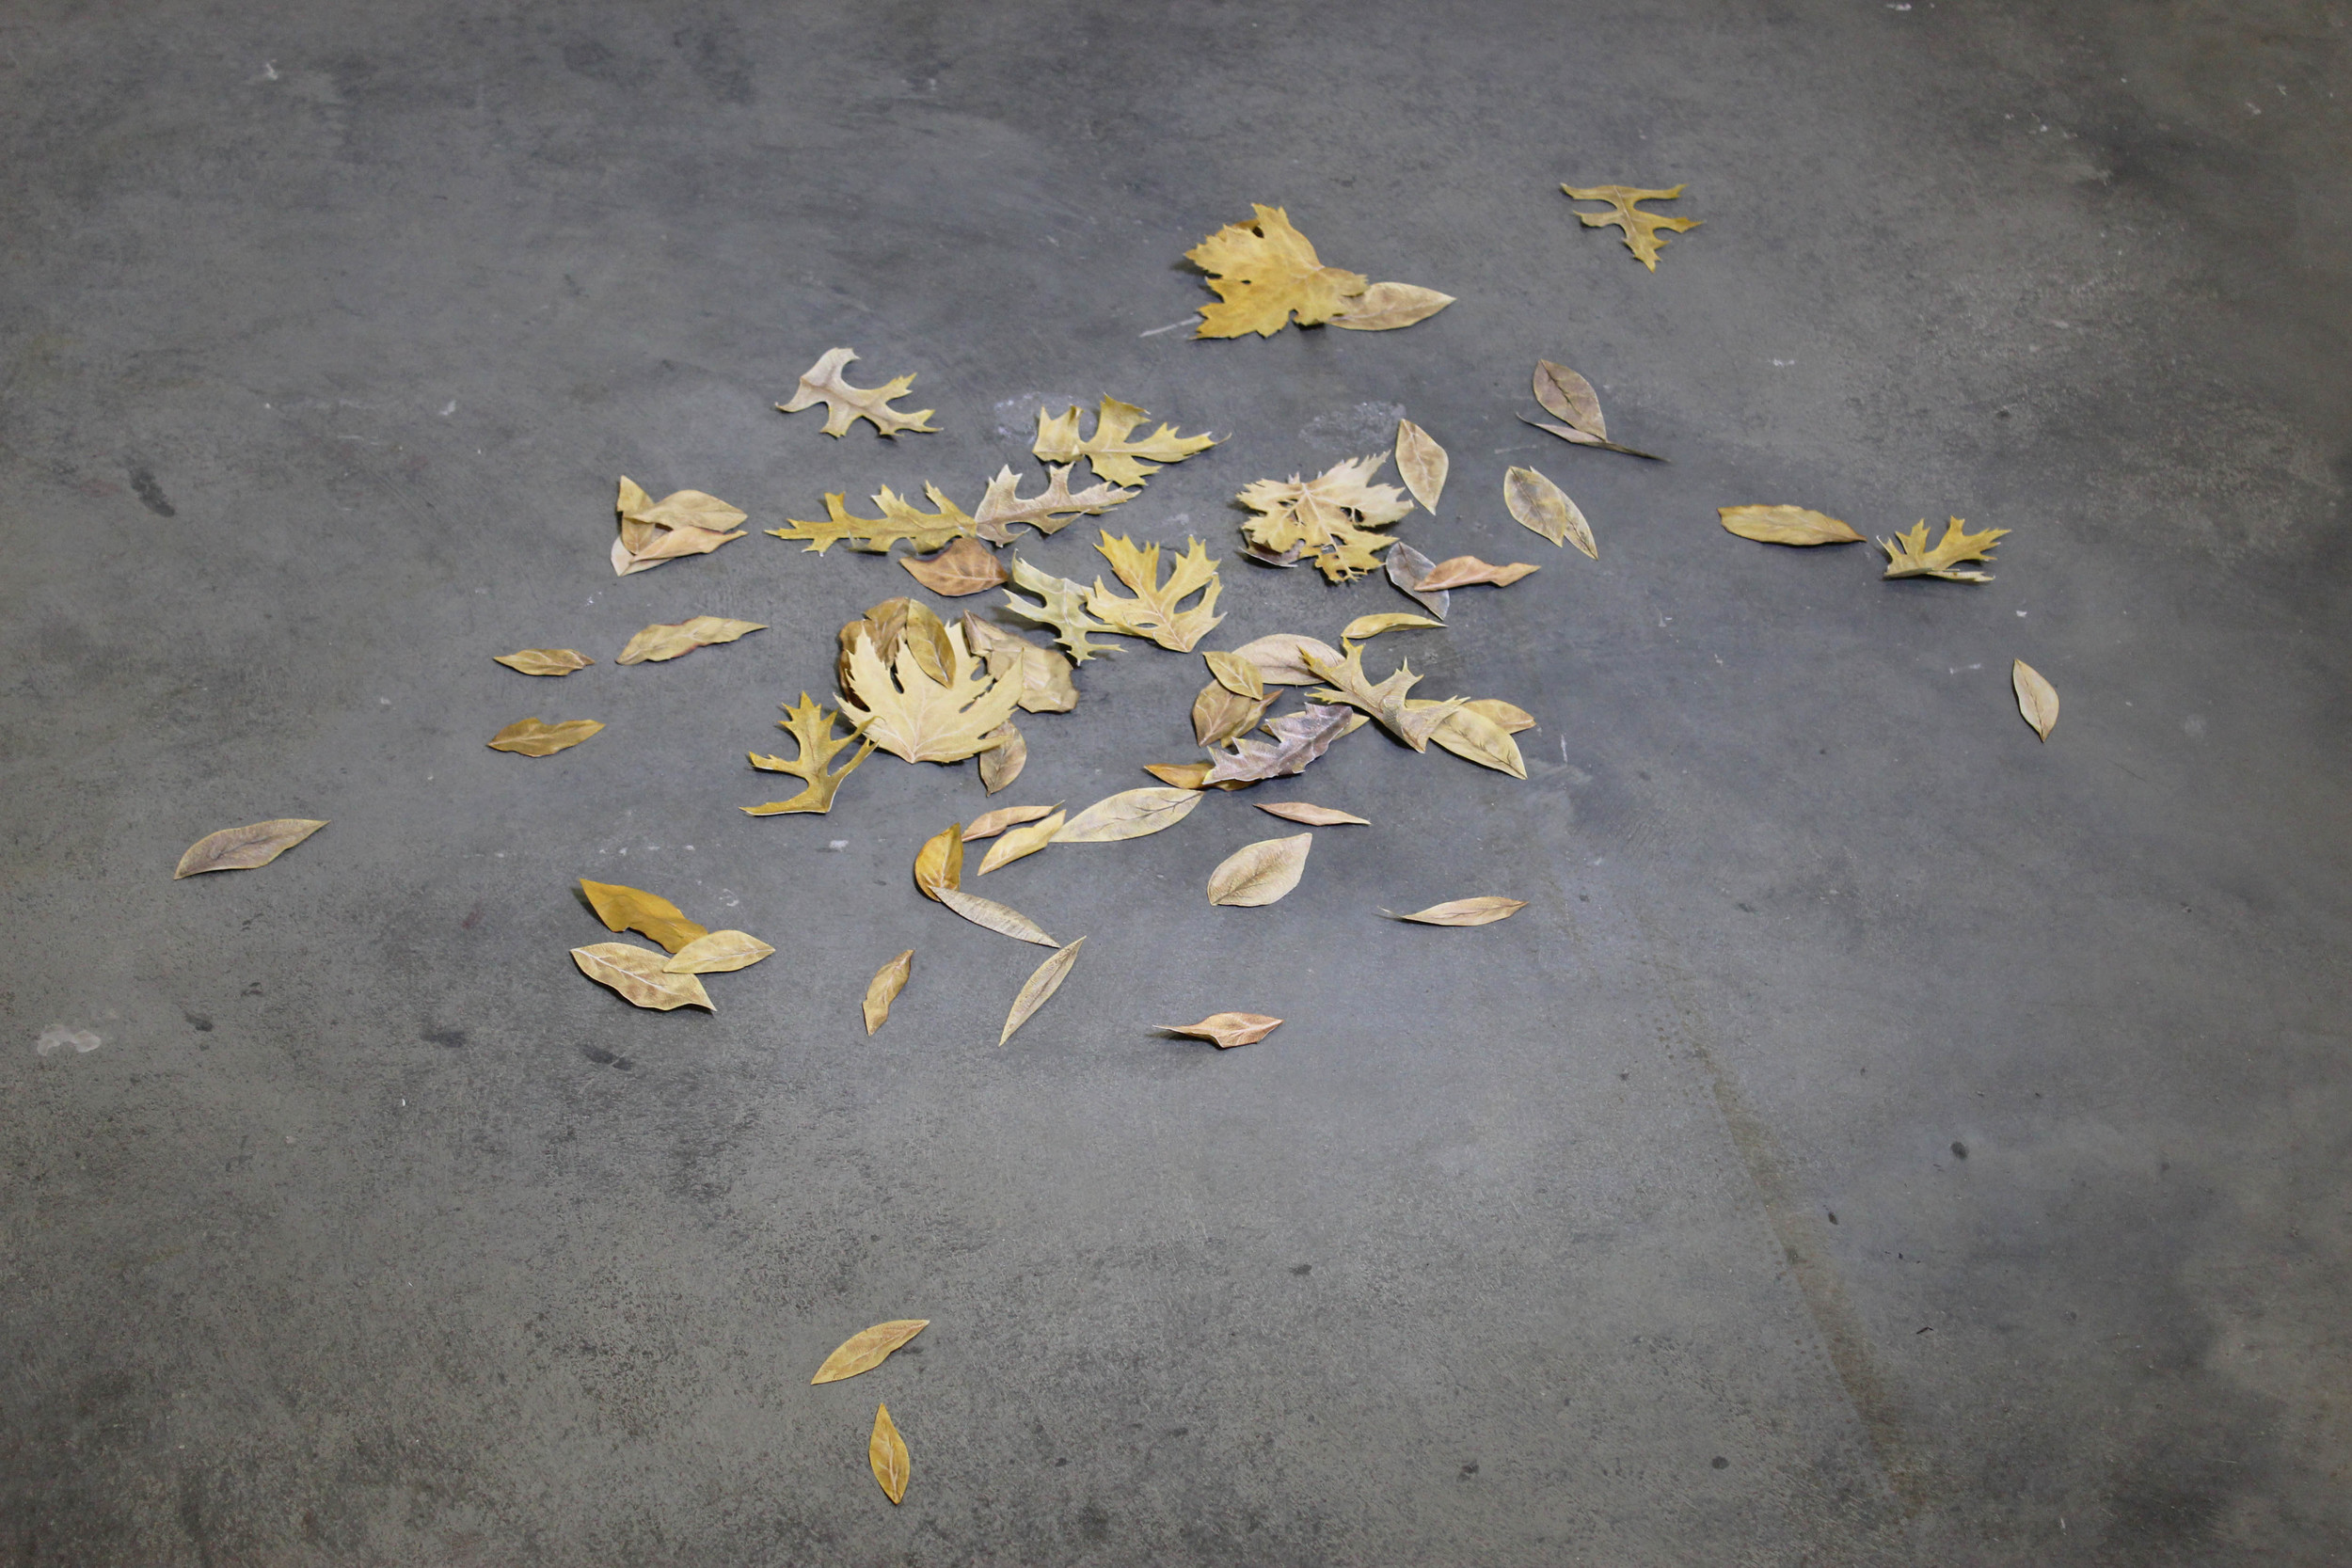 Untitled (Pile of Leaves)